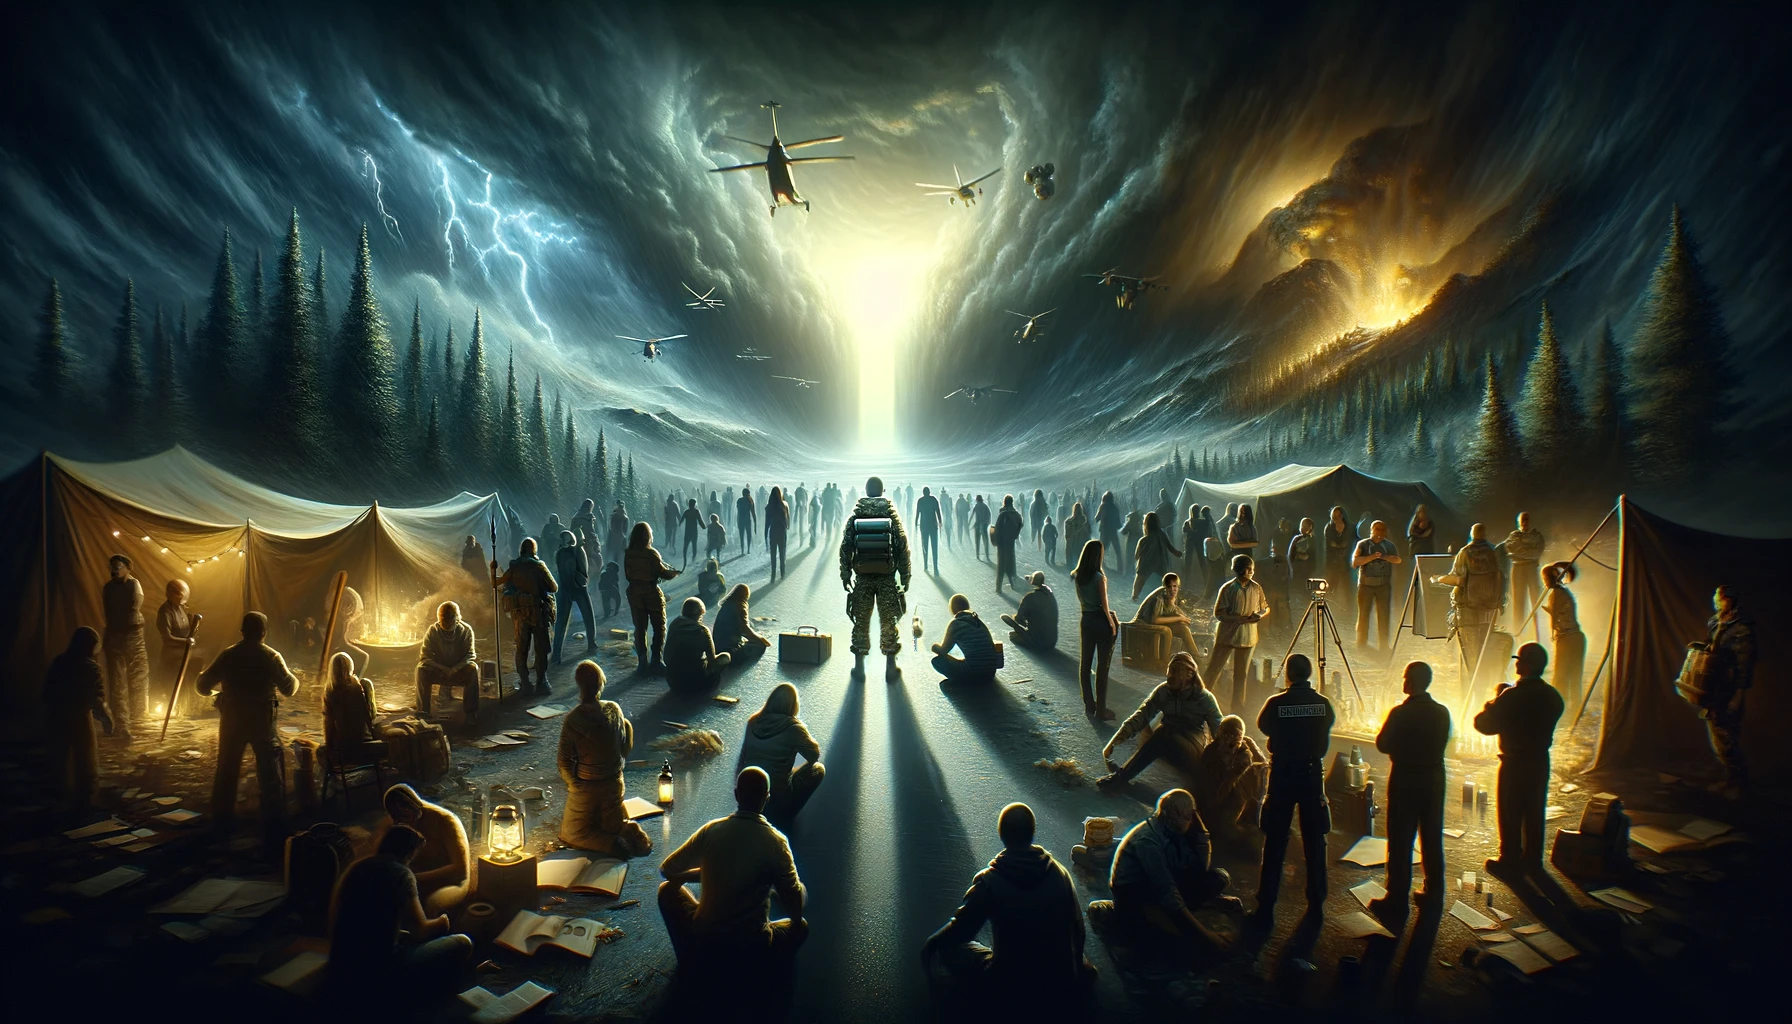 Evocative image depicting the essence of mental strength and resilience in crisis, featuring individuals and groups demonstrating determination across various survival scenarios. Includes visual metaphors like standing strong against harsh winds and finding paths towards light in darkness, scenes of community support, mindfulness practices, and mental preparedness training. Emphasizes hope, empowerment, and the indomitable human spirit, underscoring mental fortitude as a cornerstone of overcoming adversity and thriving in crisis situations, designed to inspire the prepper community